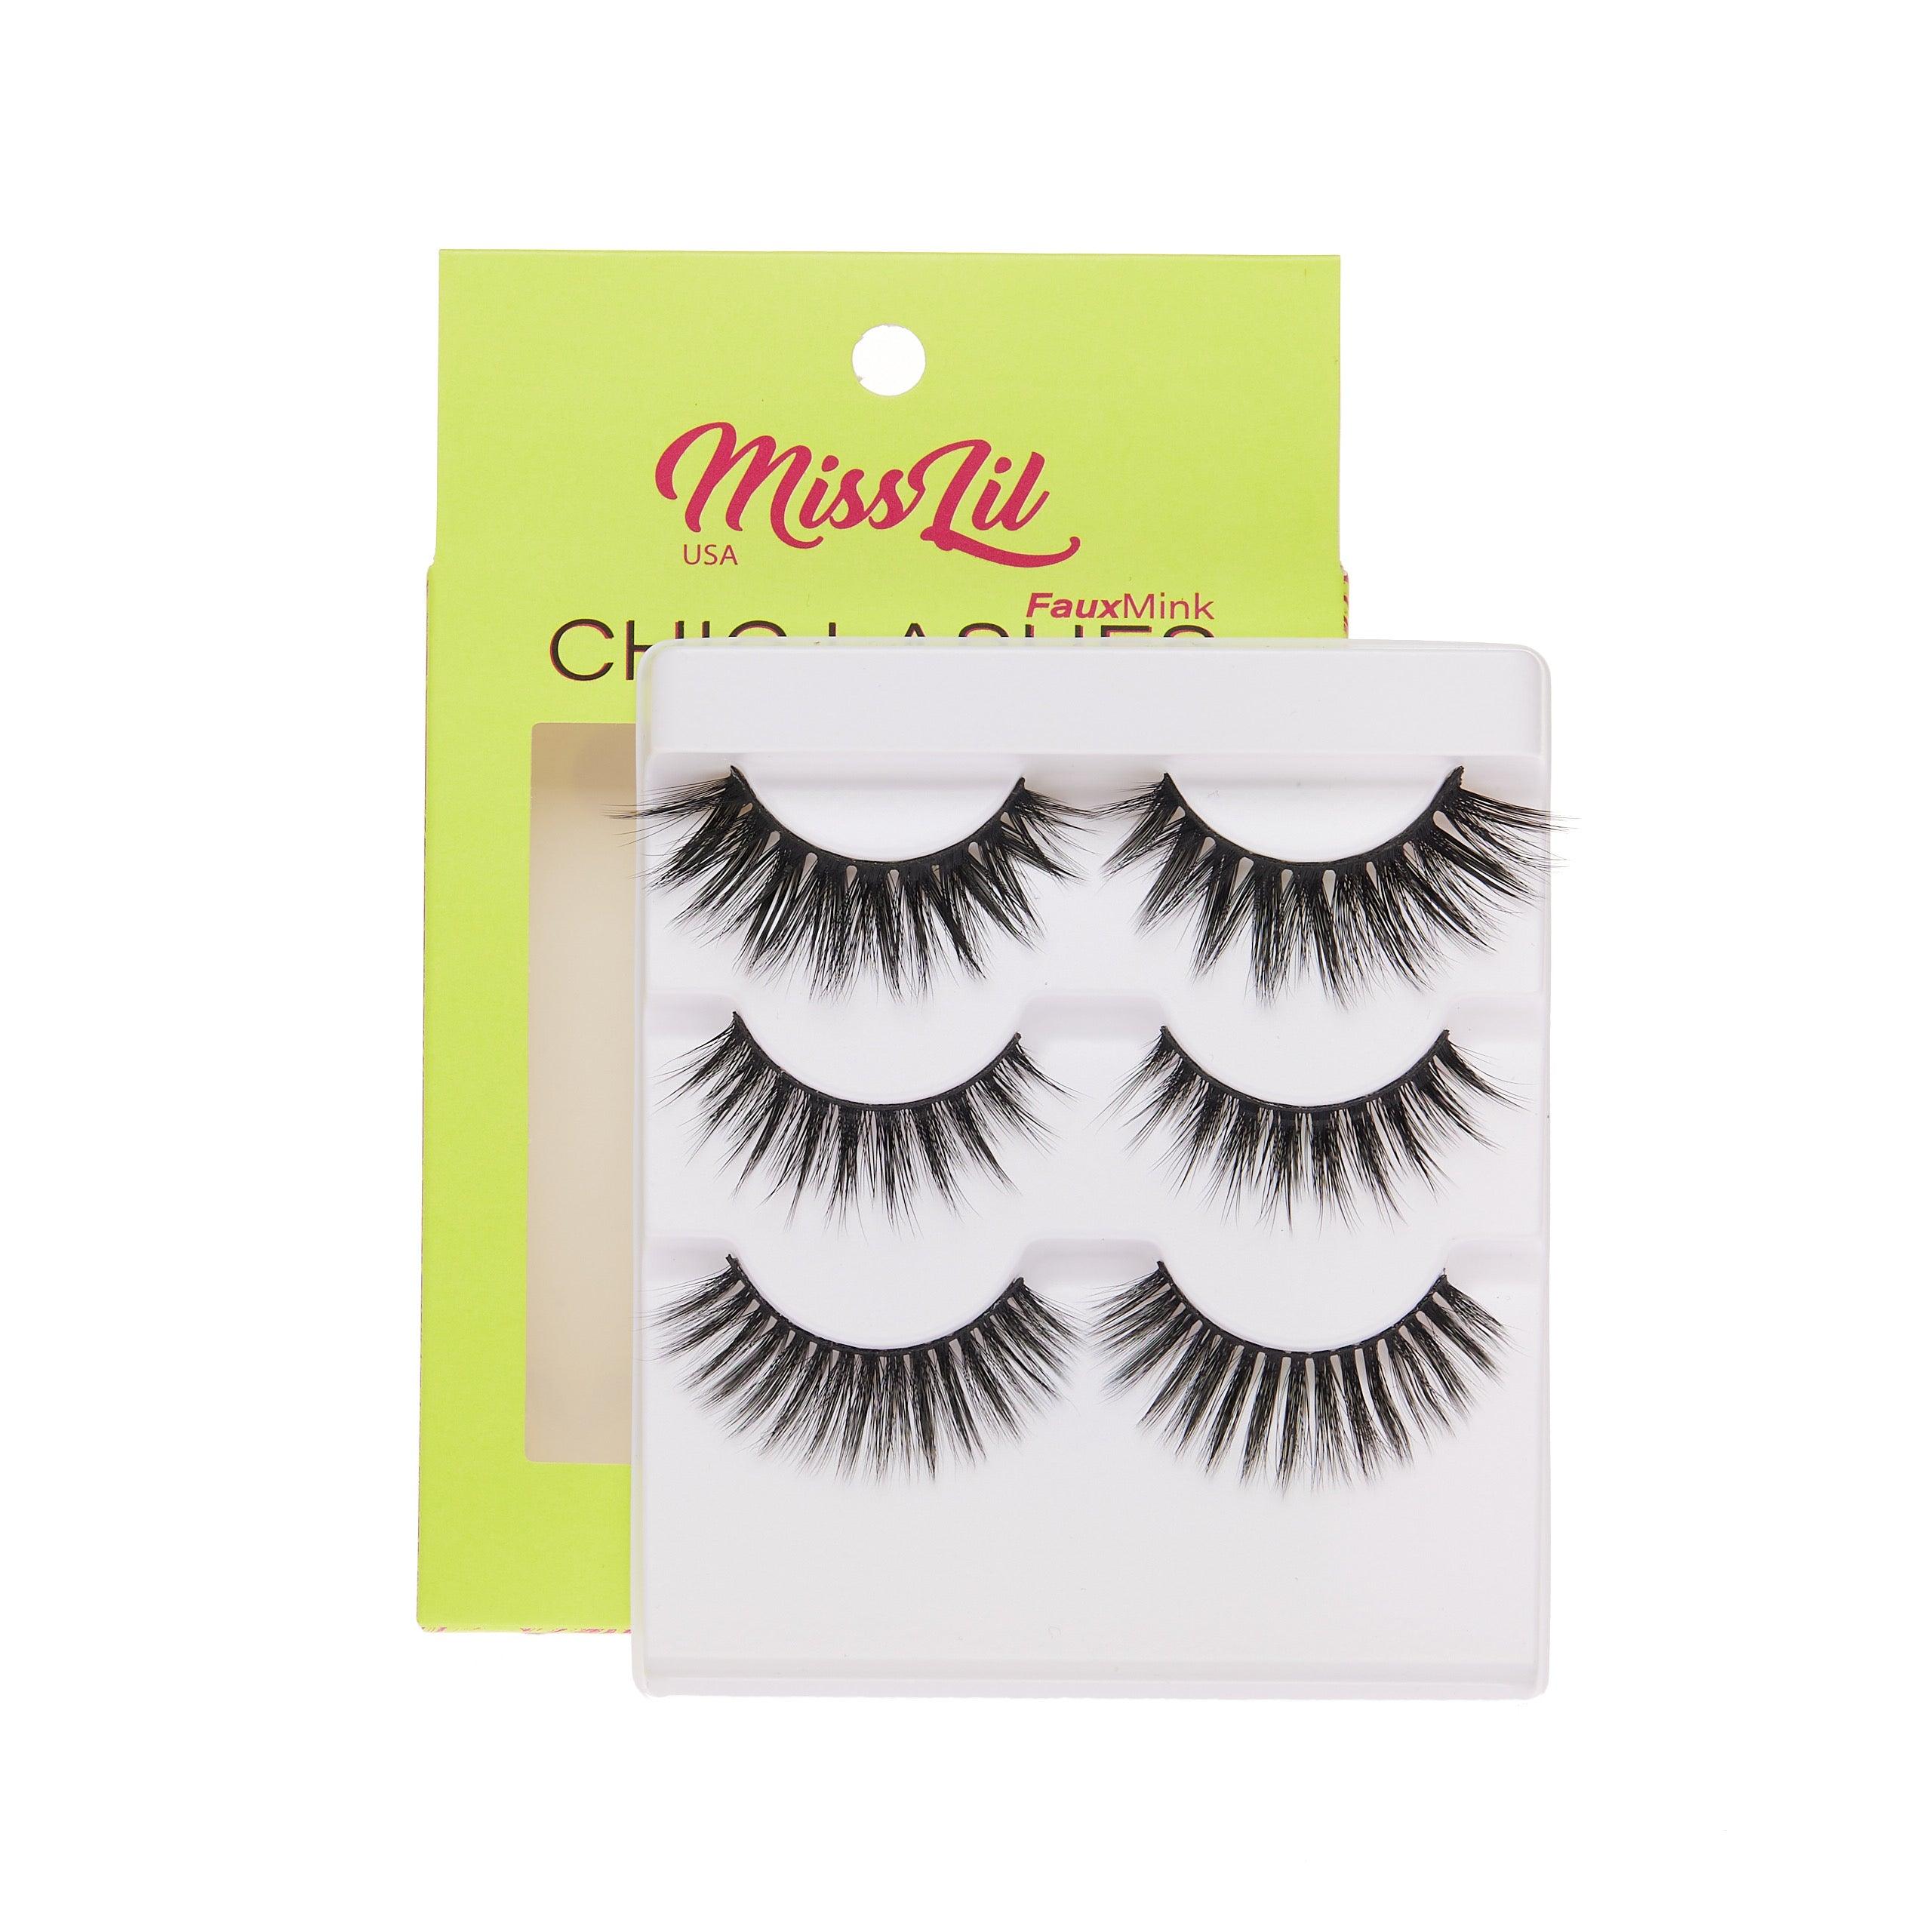 3-Pair Faux Mink Eyelashes - Chic Lashes Collection #35 - Pack of 3 - Miss Lil USA